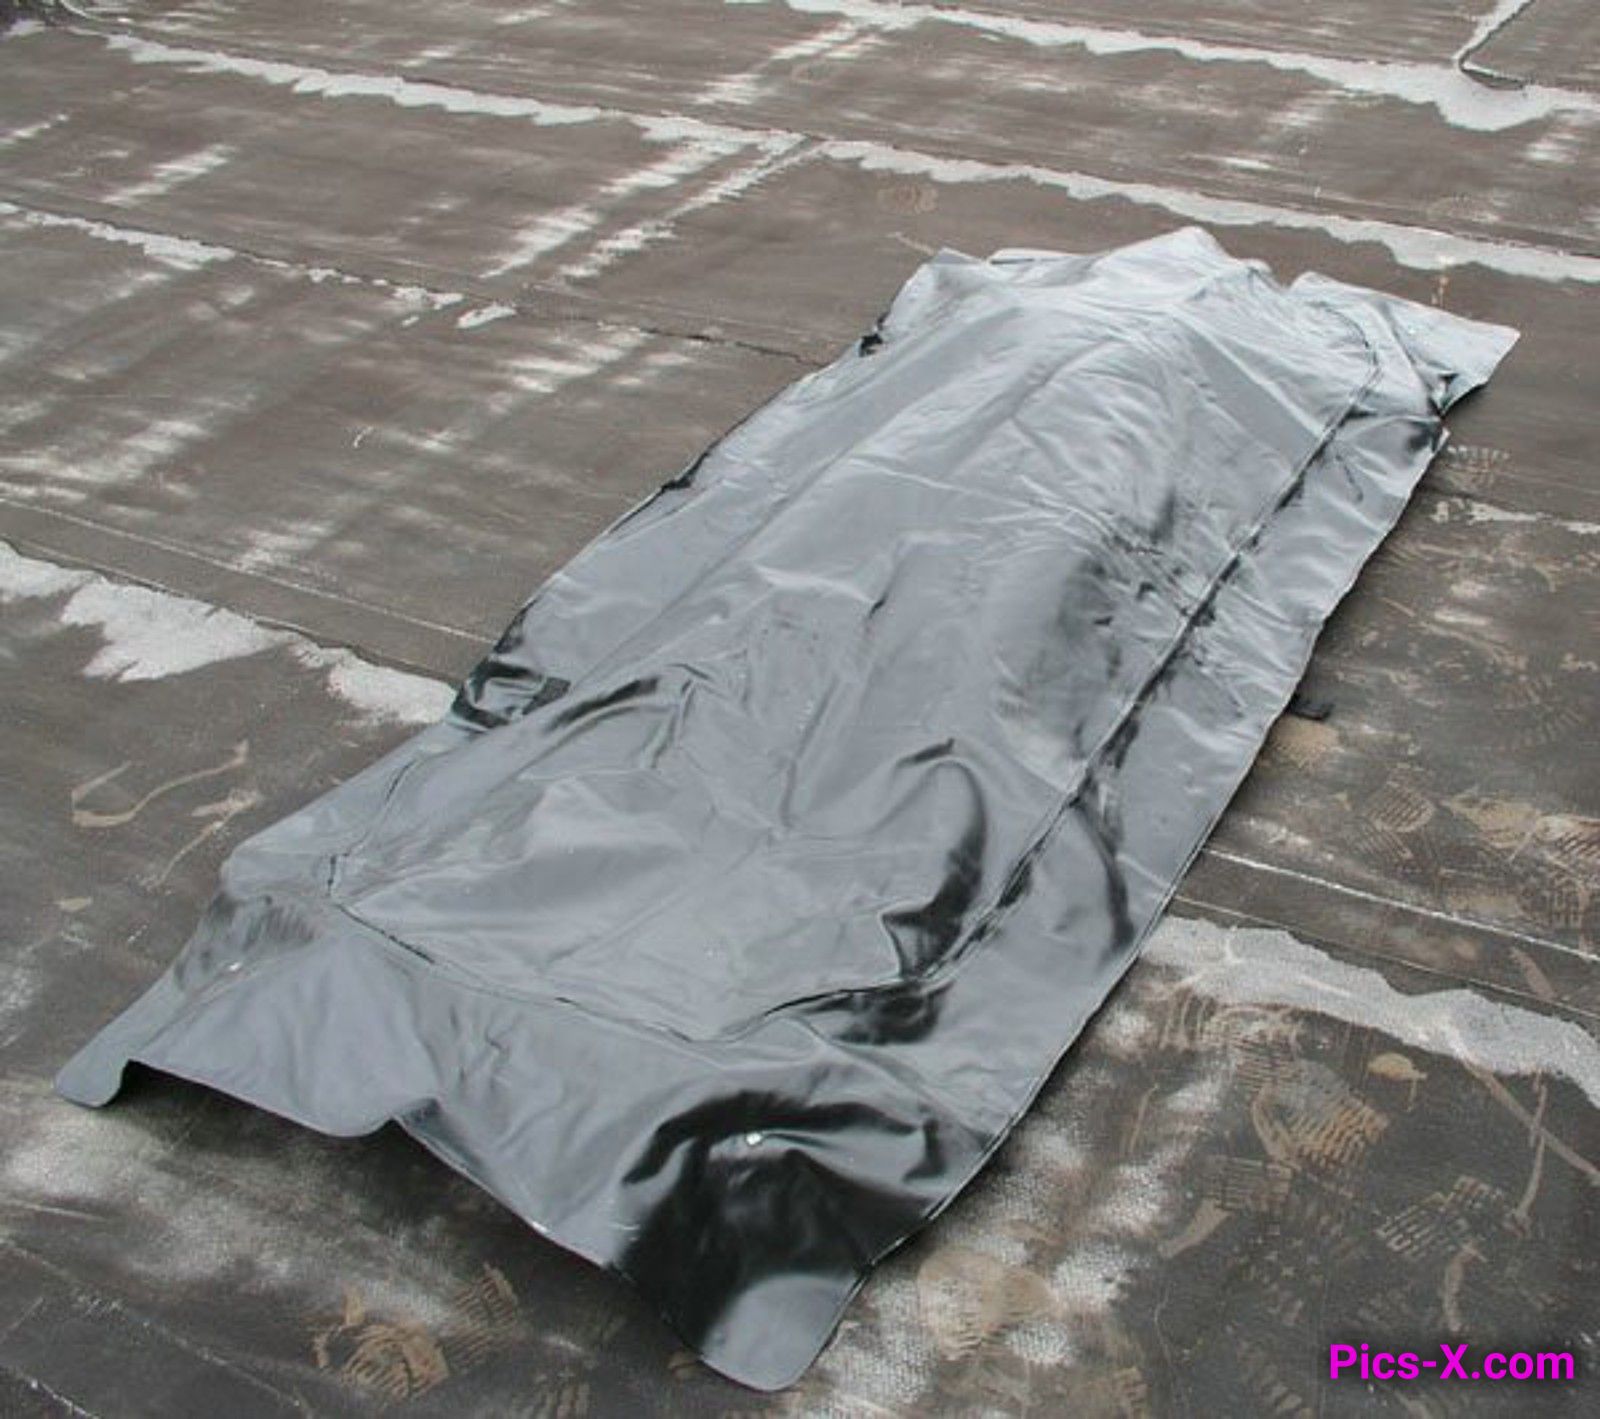 Topless goth girl emerges from a body bag in these shots - Punk Rock Girlfriend - Image 1